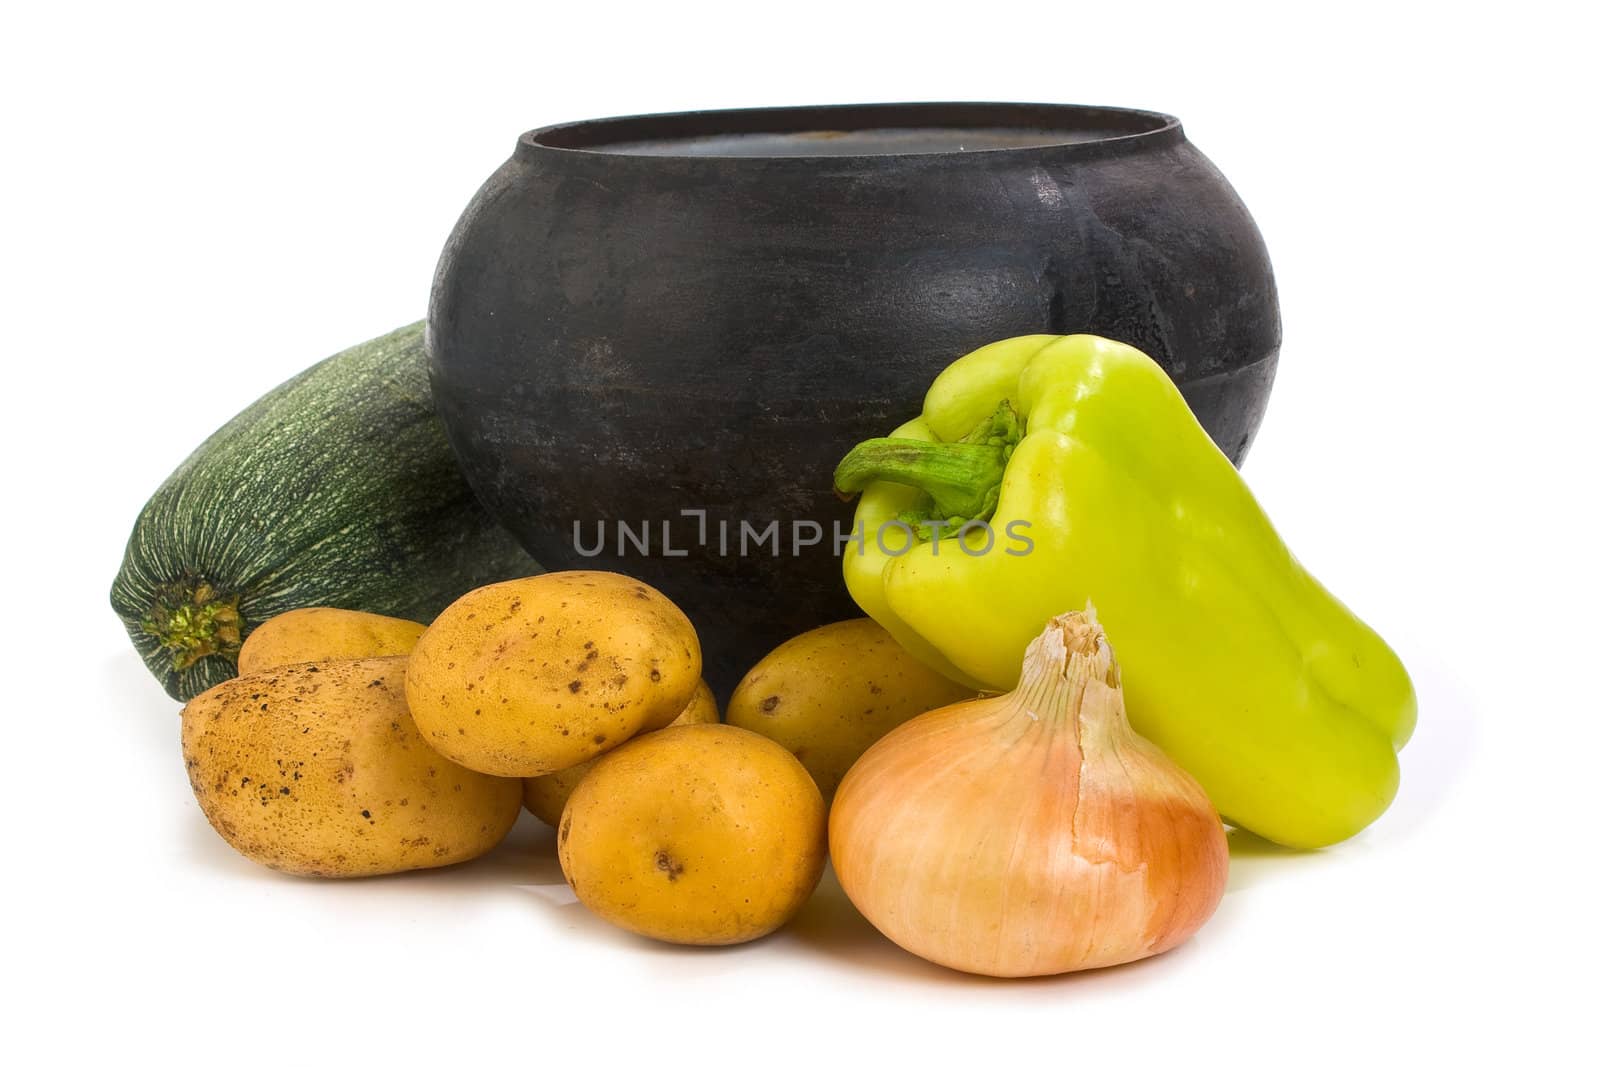 cast iron pot and potato isolated on a white background 